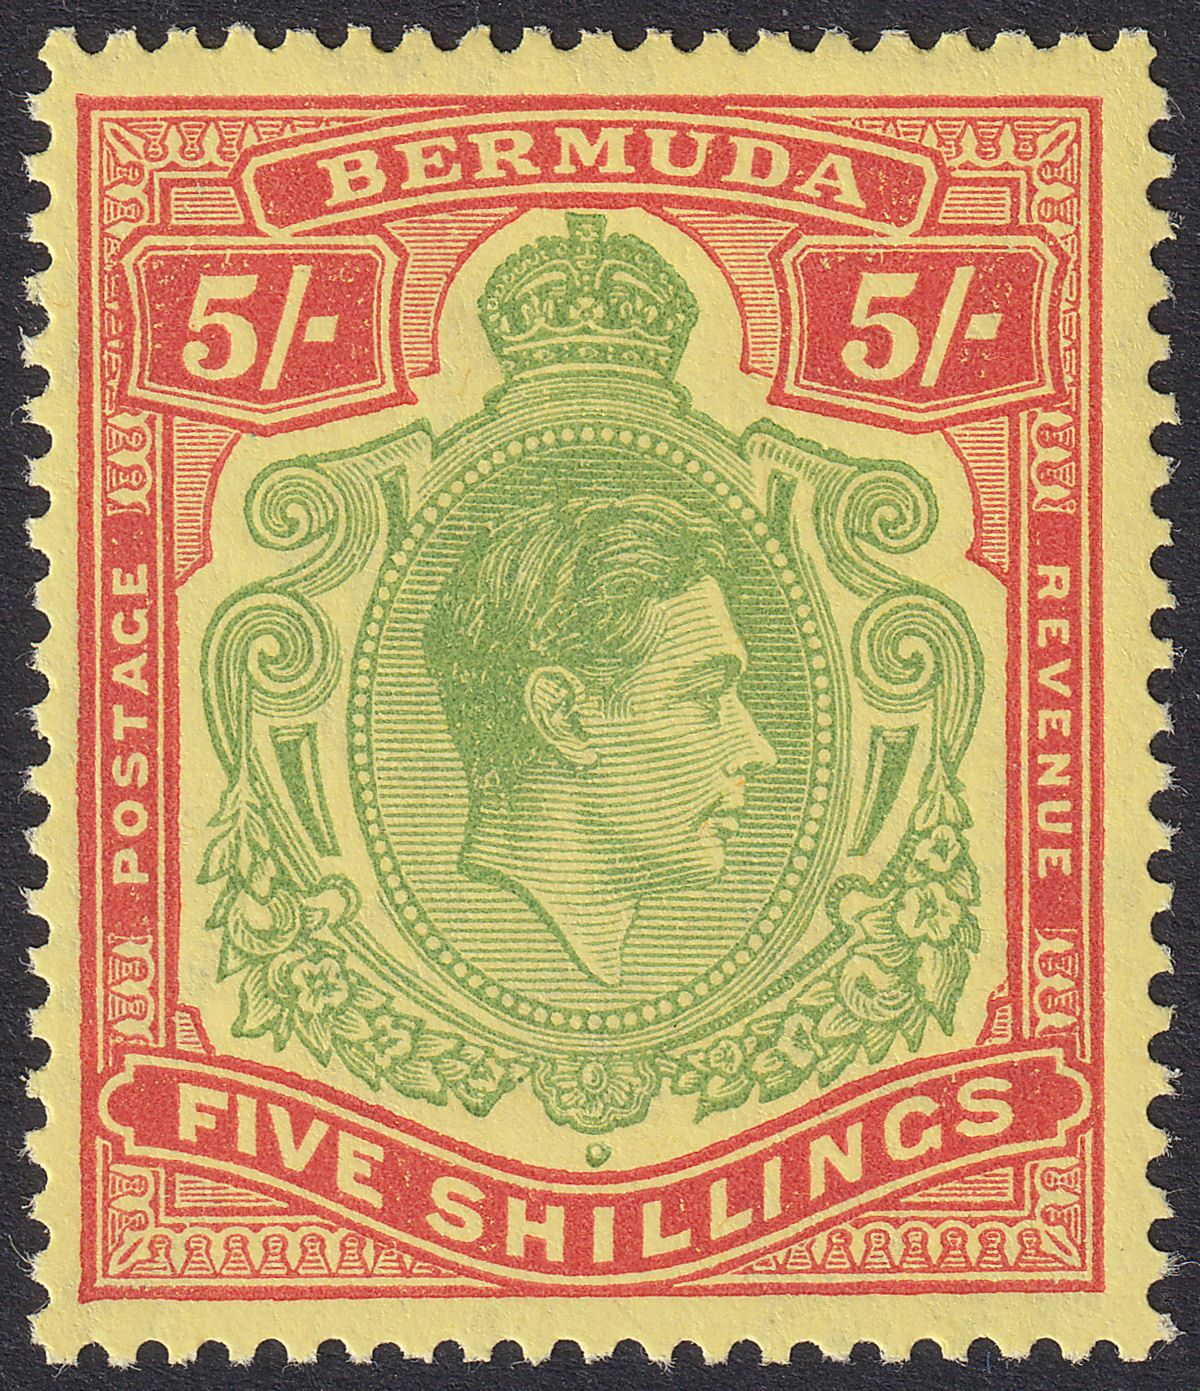 Bermuda 1949 KGVI 5sh Yellow-Green and Red on Pale Yellow p13 Mint SG118f